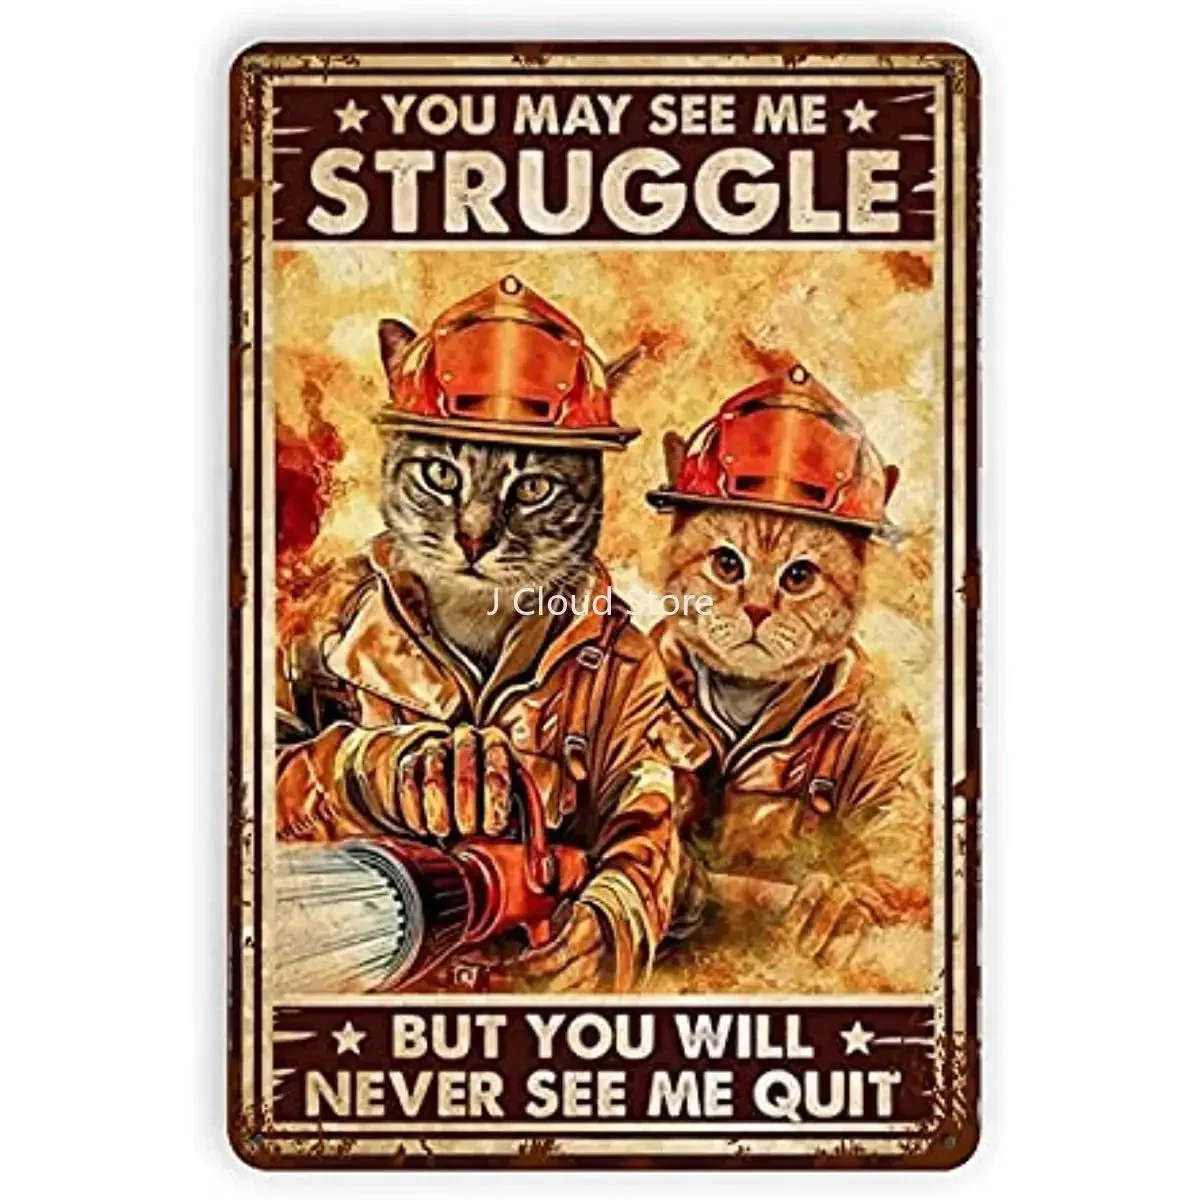 Tin Sign Vintage Cat Firefighter Poster Garden Bathroom Bedroom Club Wall Decoration Birthday Gift 12x18 Inches barber metal tin sign barber shop price list printing poster retro salon bedroom shop club wall decoration plaque 8x12 inches